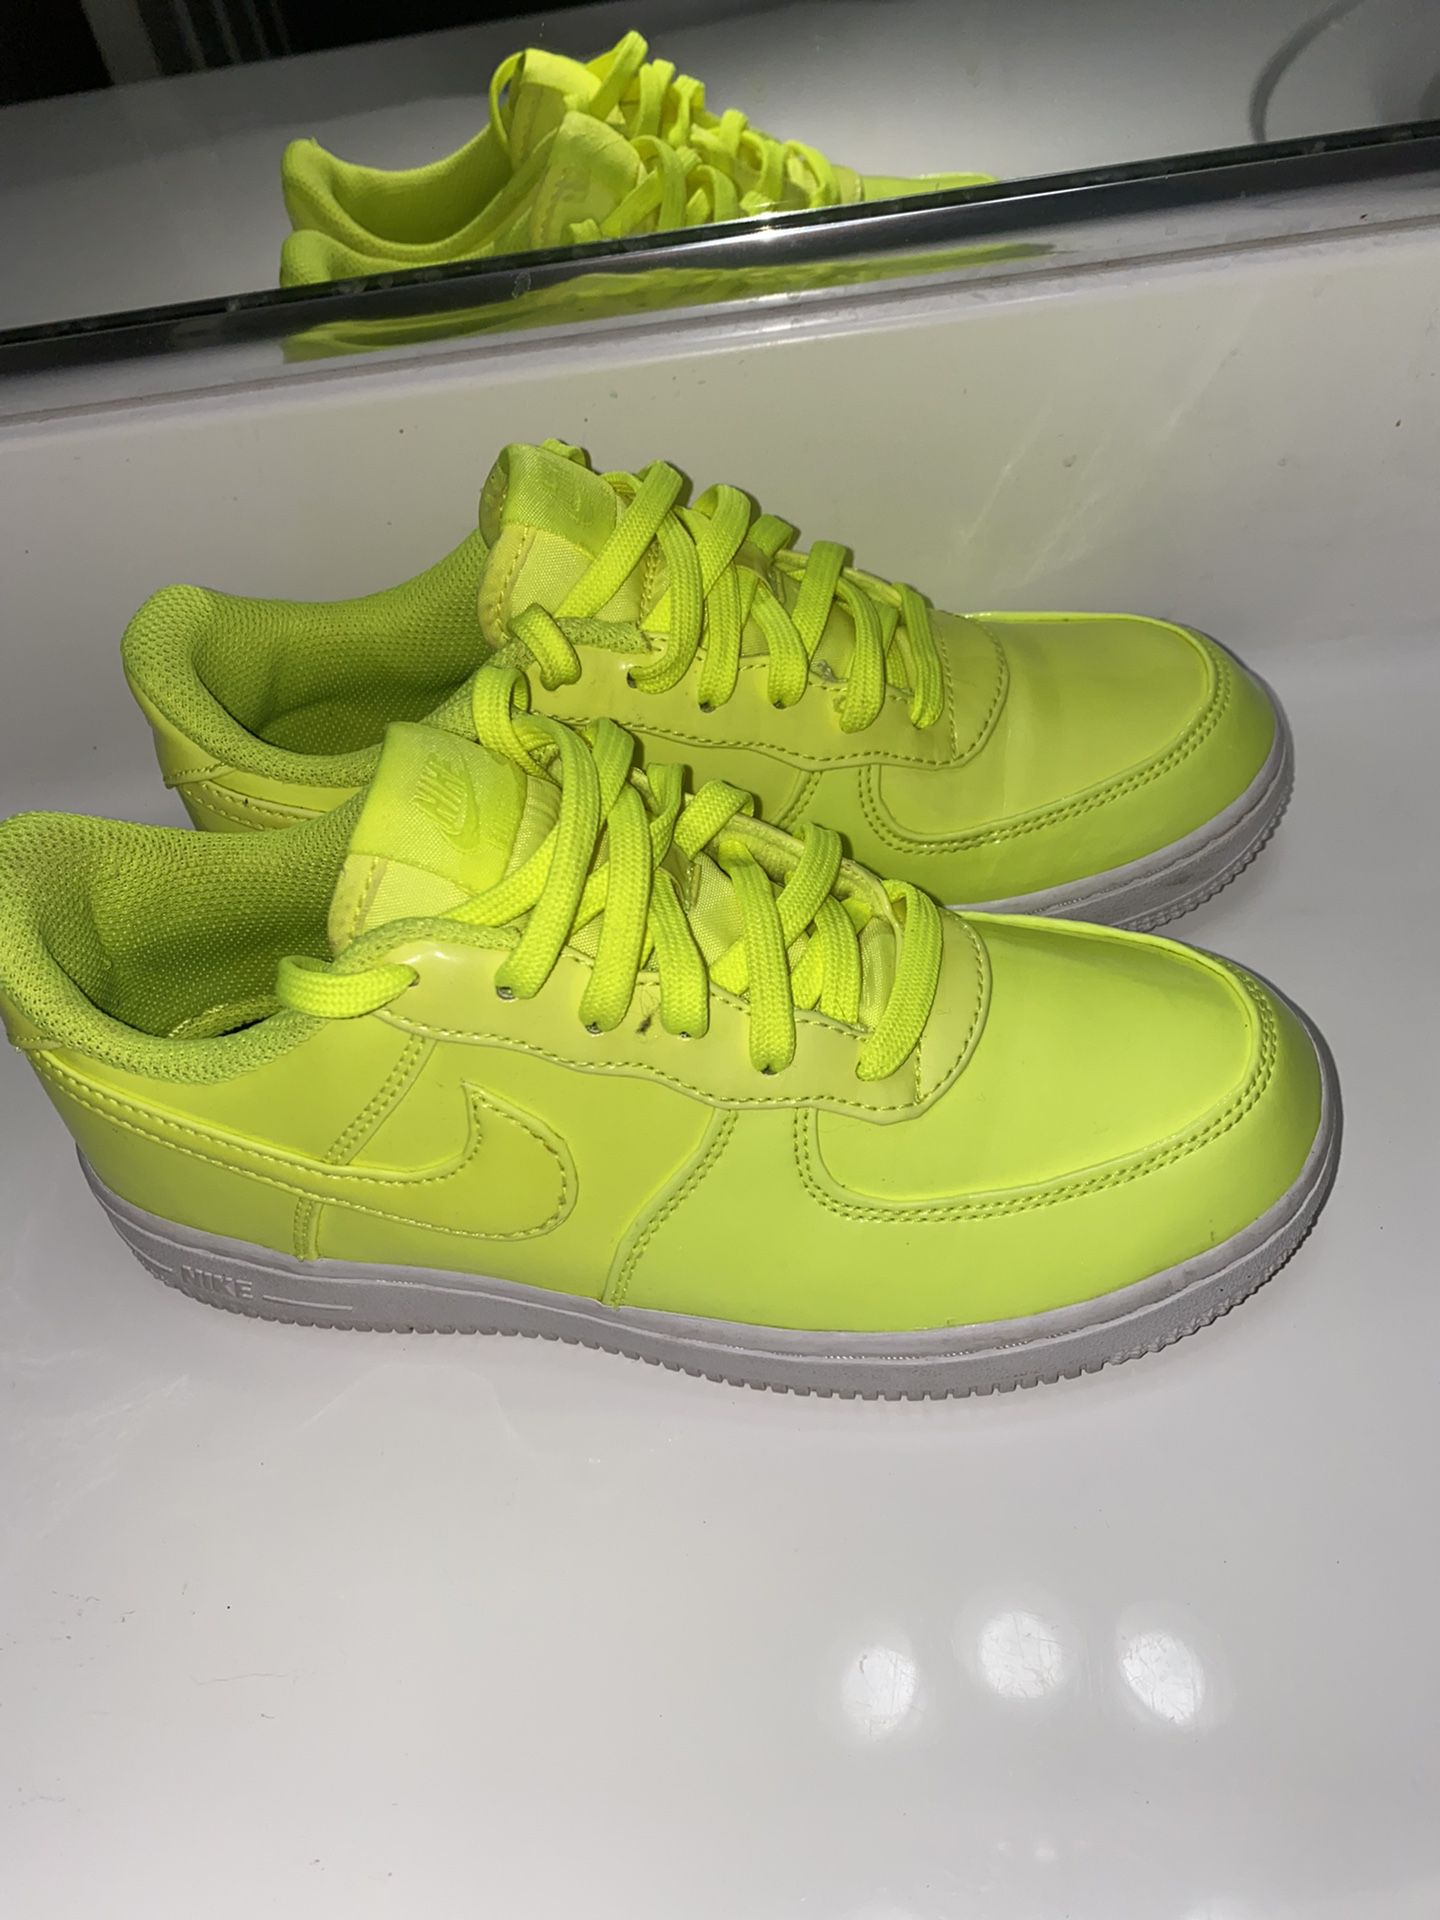 Force 1 LV8 UV Volt Size 3y for Sale in Goodyear, AZ - OfferUp